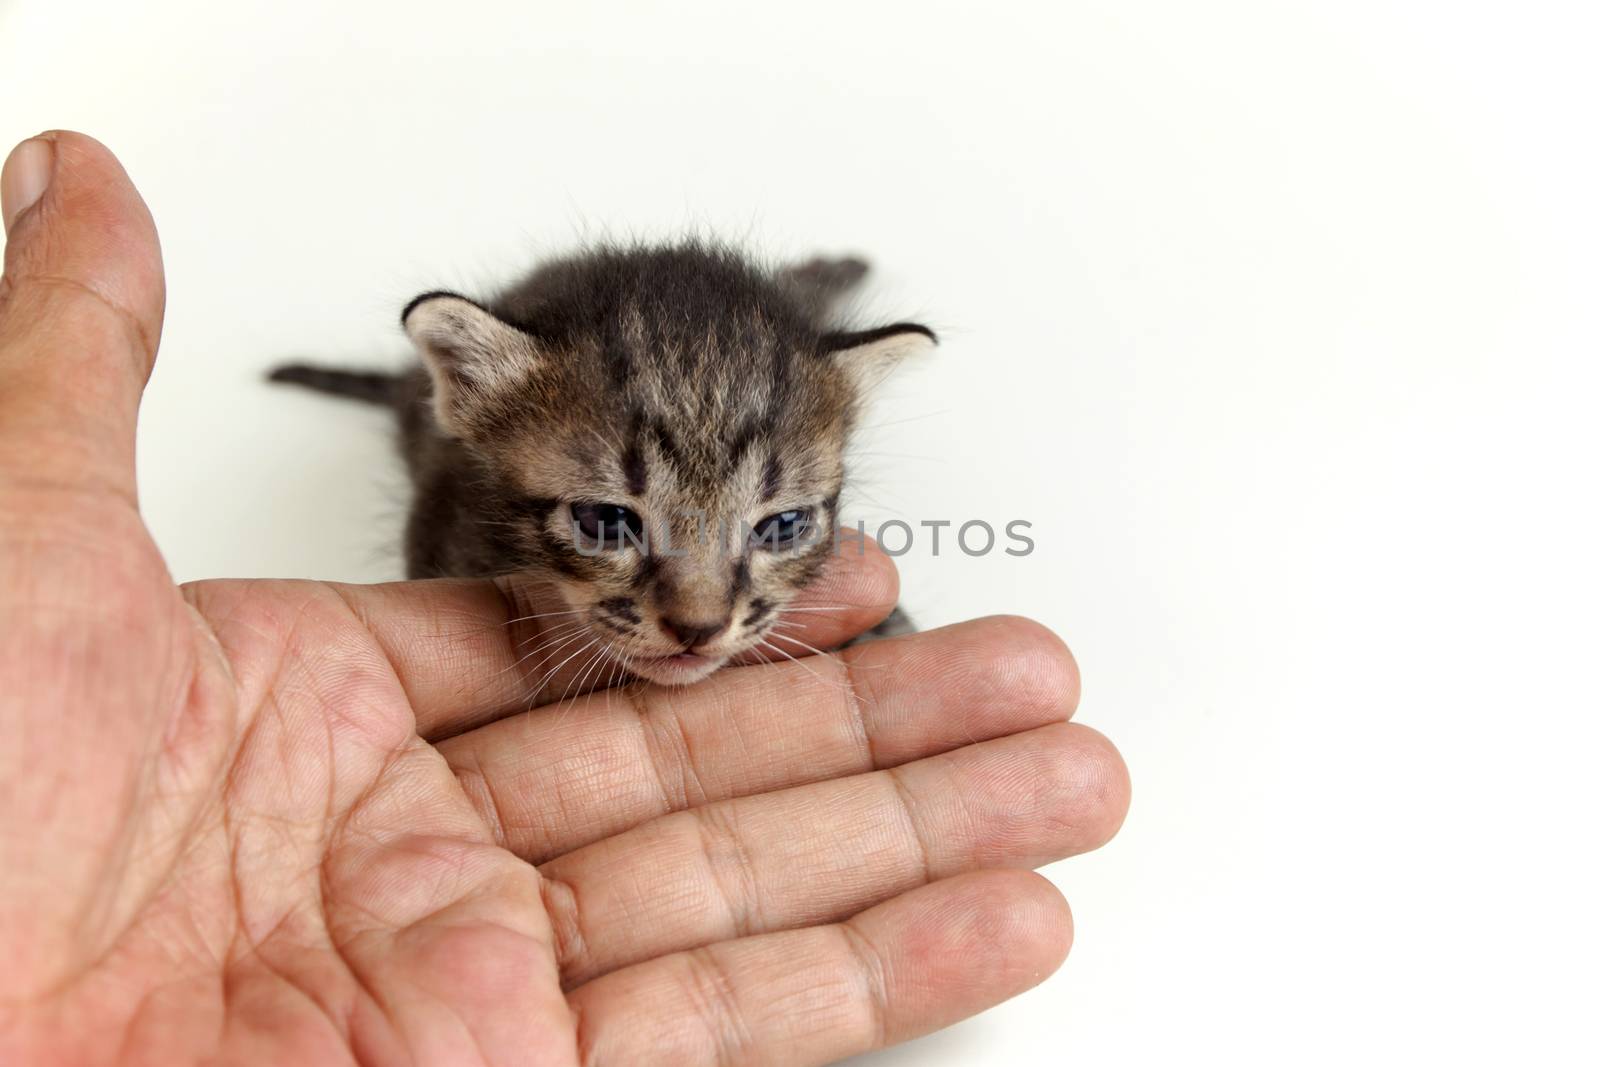 human hand gently holding face of adorable newborn brown tabby kitten on white background